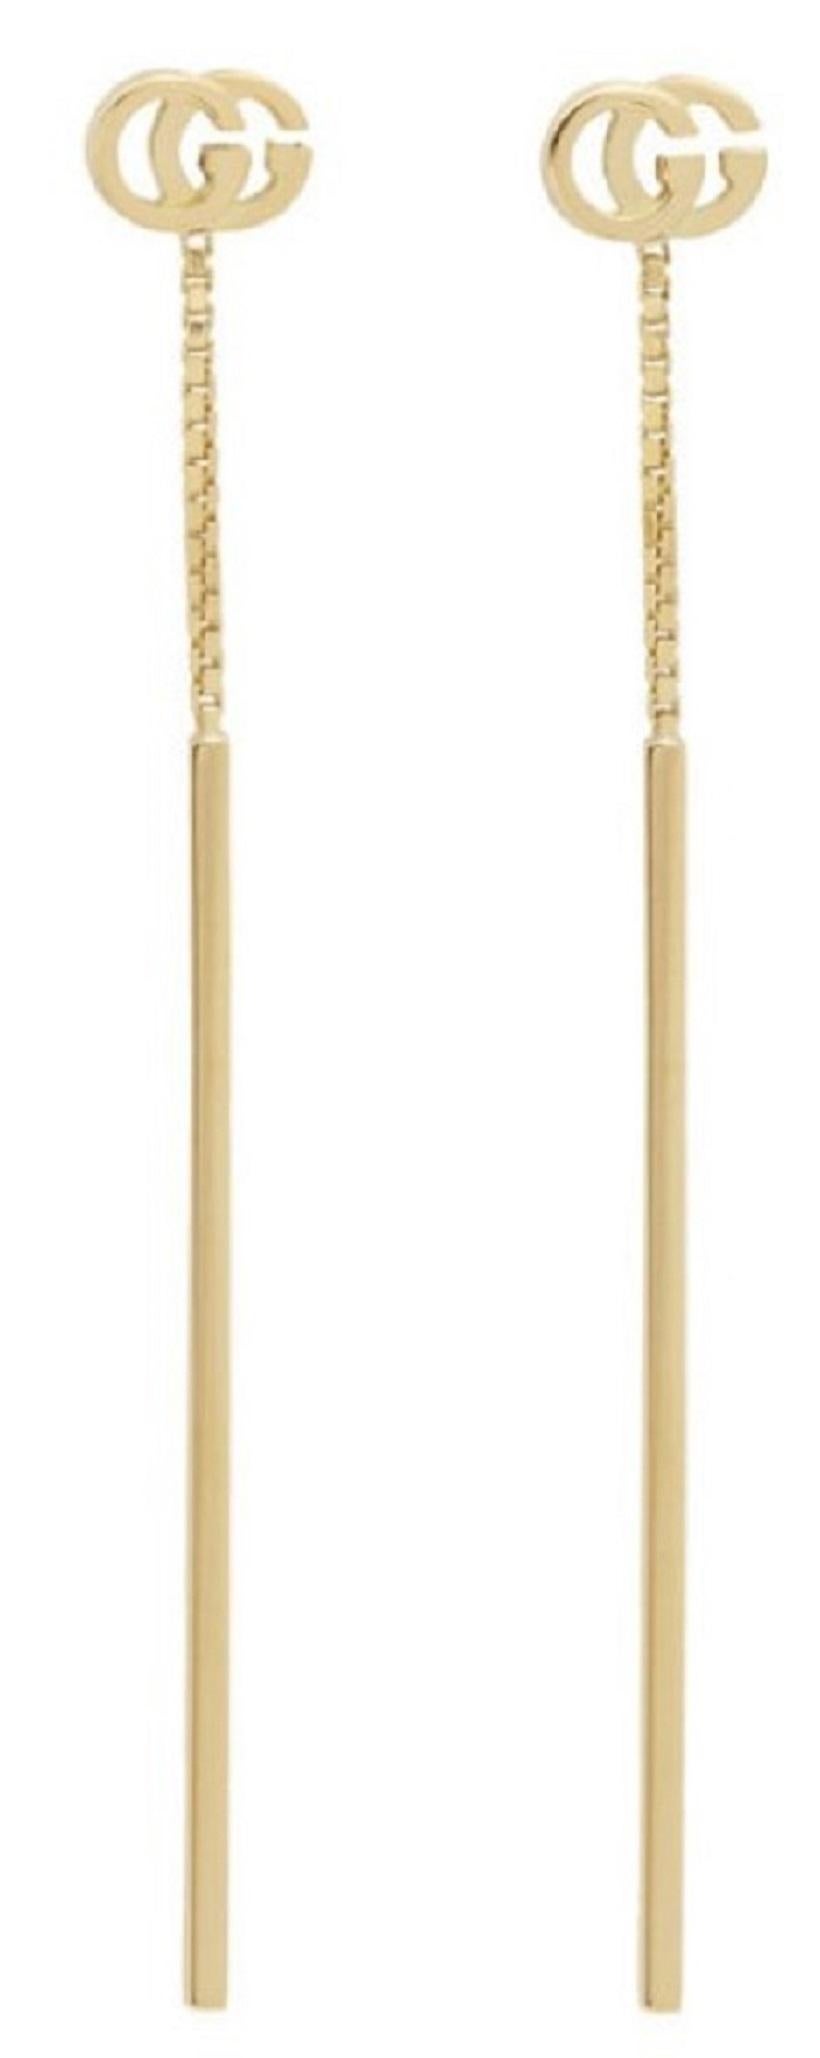 Gucci Gold GG Running Long Pendant Earrings
by Gucci
Pair of earrings in 18k gold.
 Logo plaque at post-stud fastening.
 Approx. 2.5 length.Supplier color: Gold